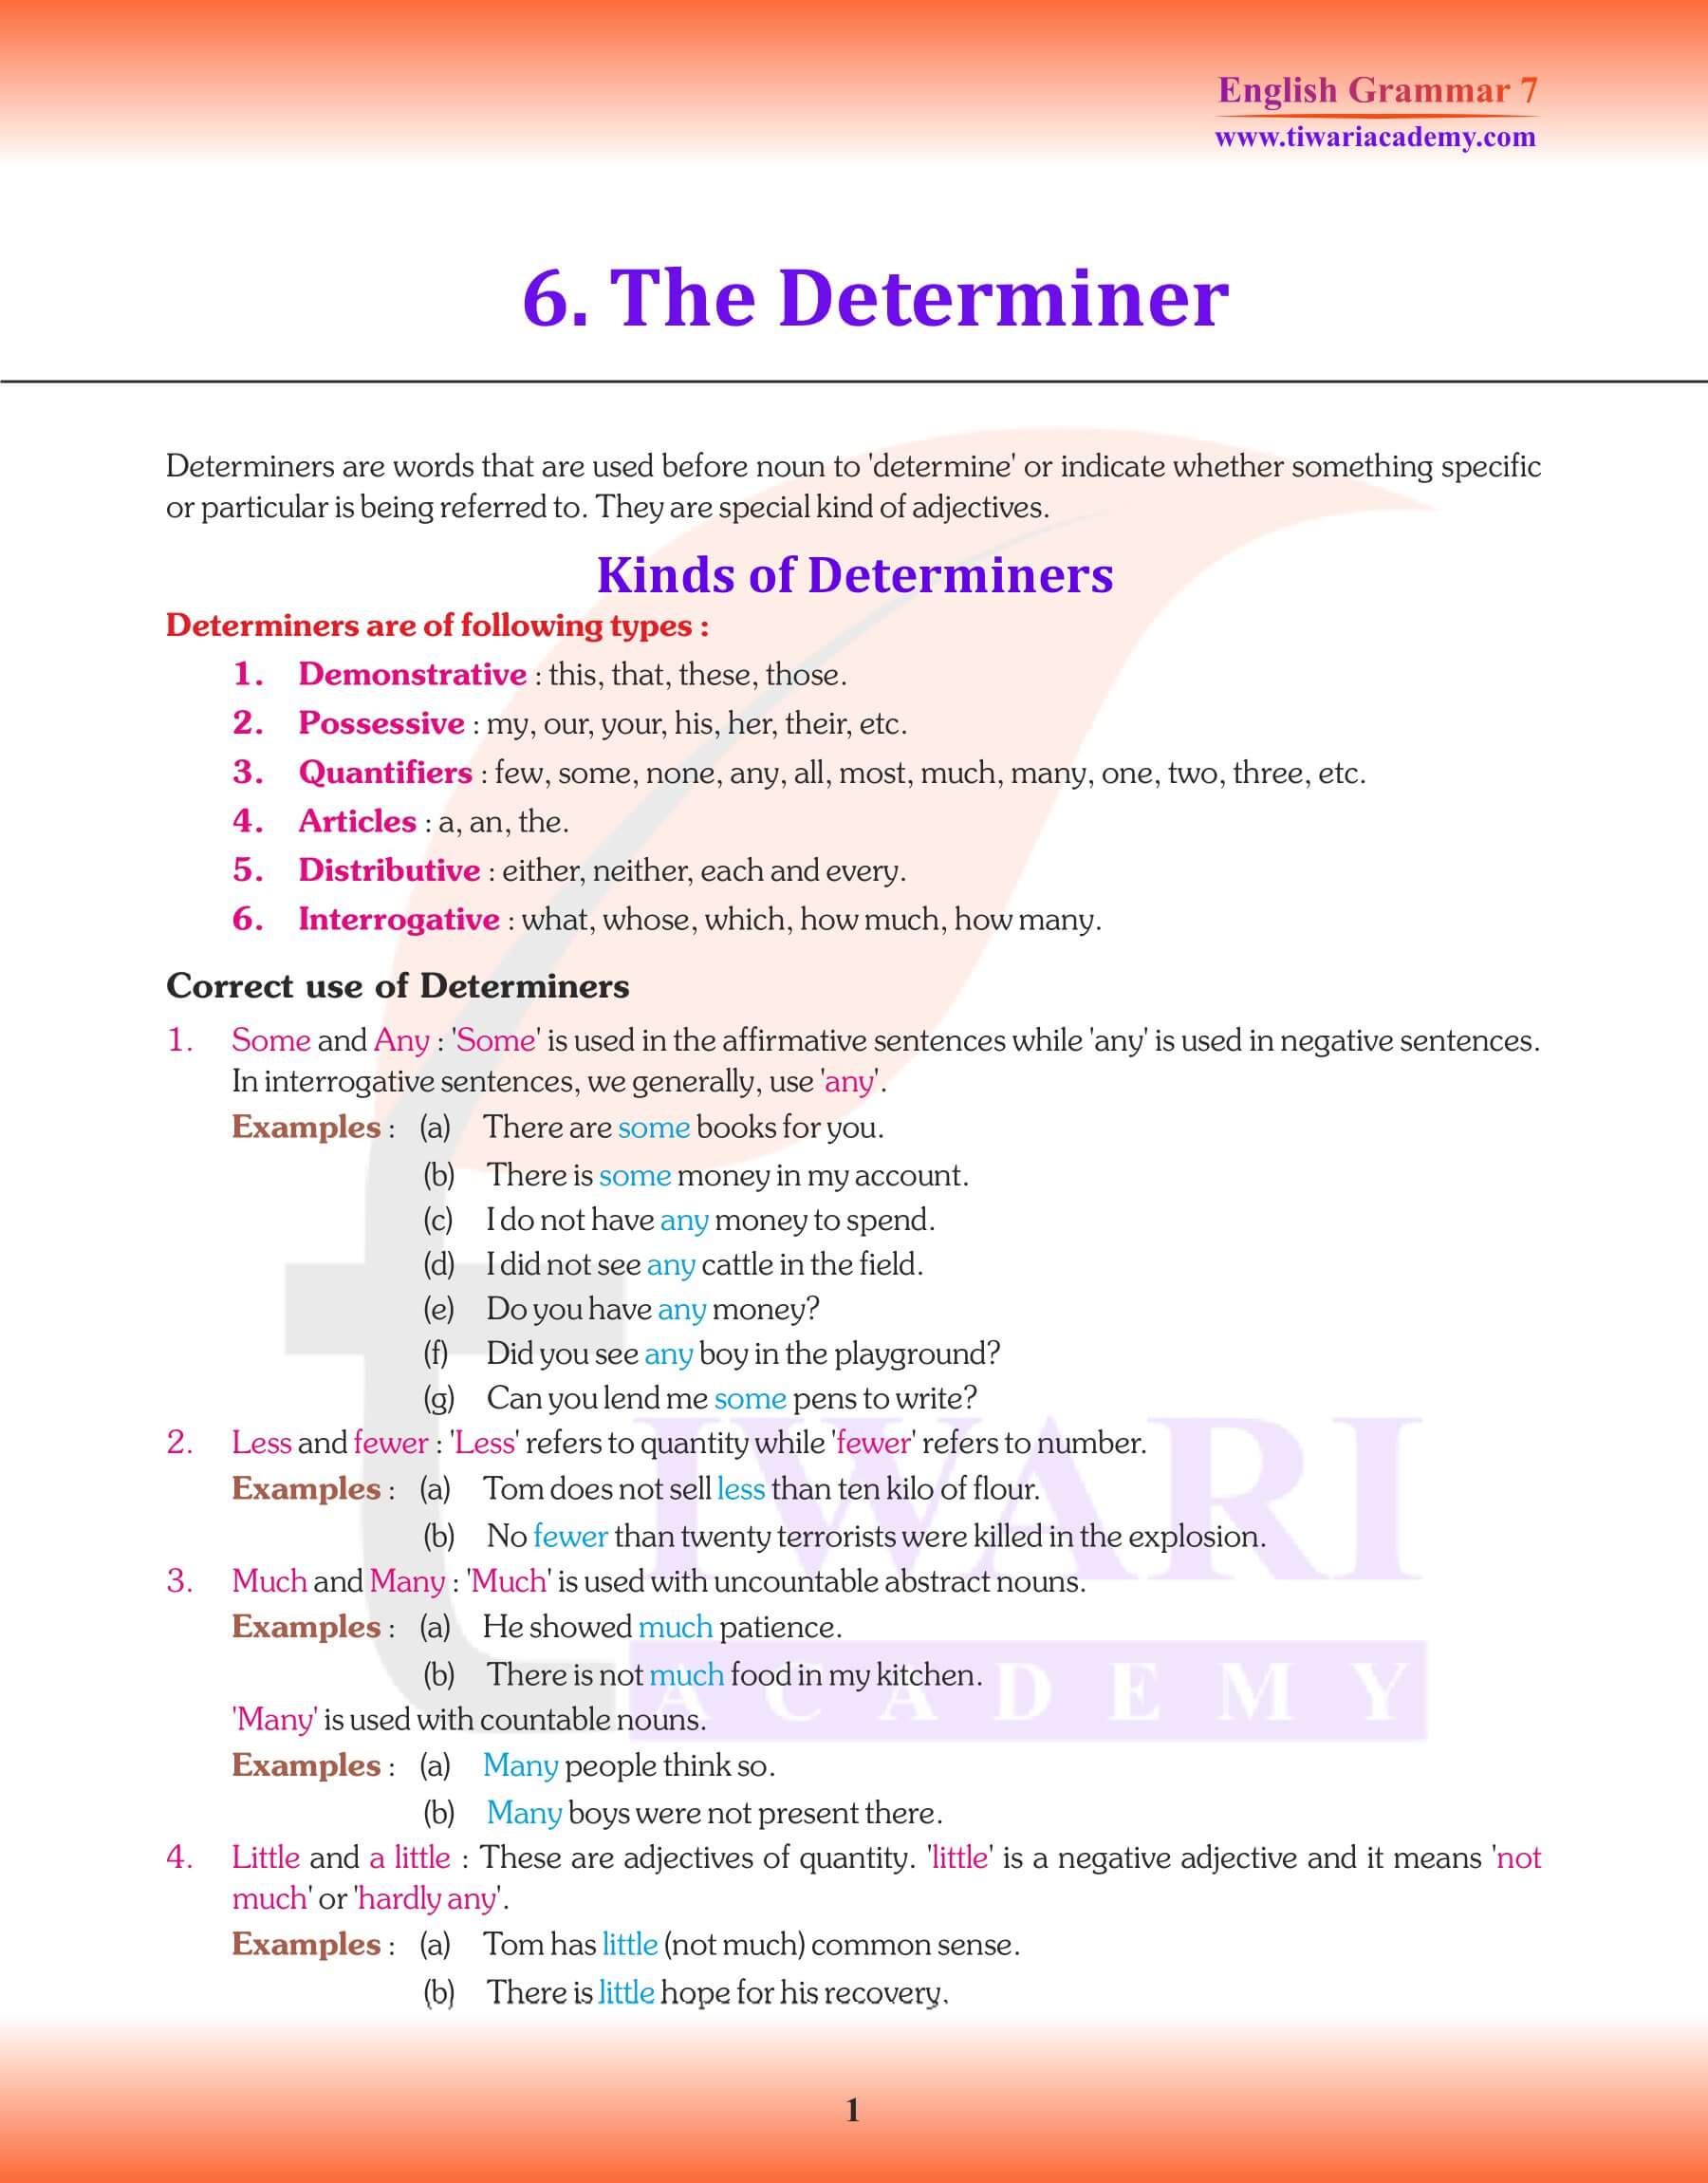 Class 7 English Grammar Chapter 6 Revision book